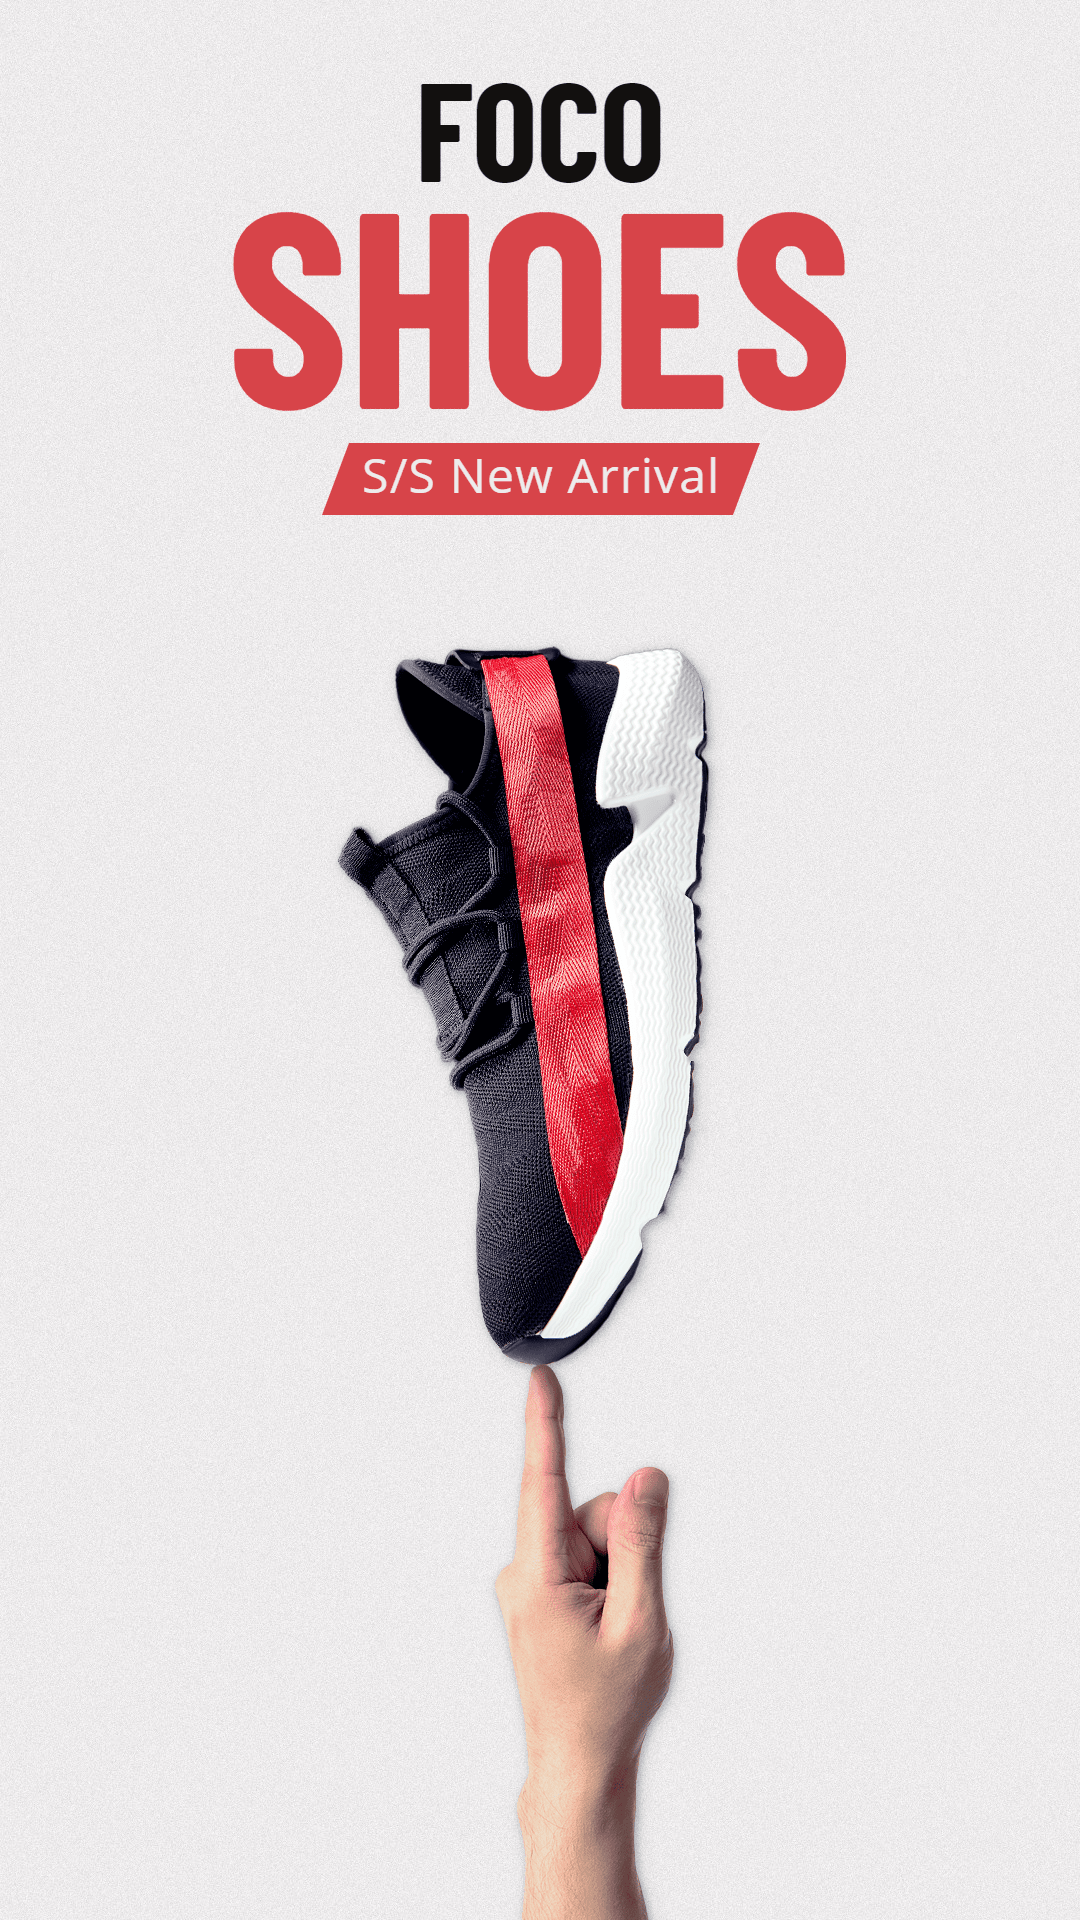 Minimalist Sport Shoes New Arrival Display Ecommerce Story